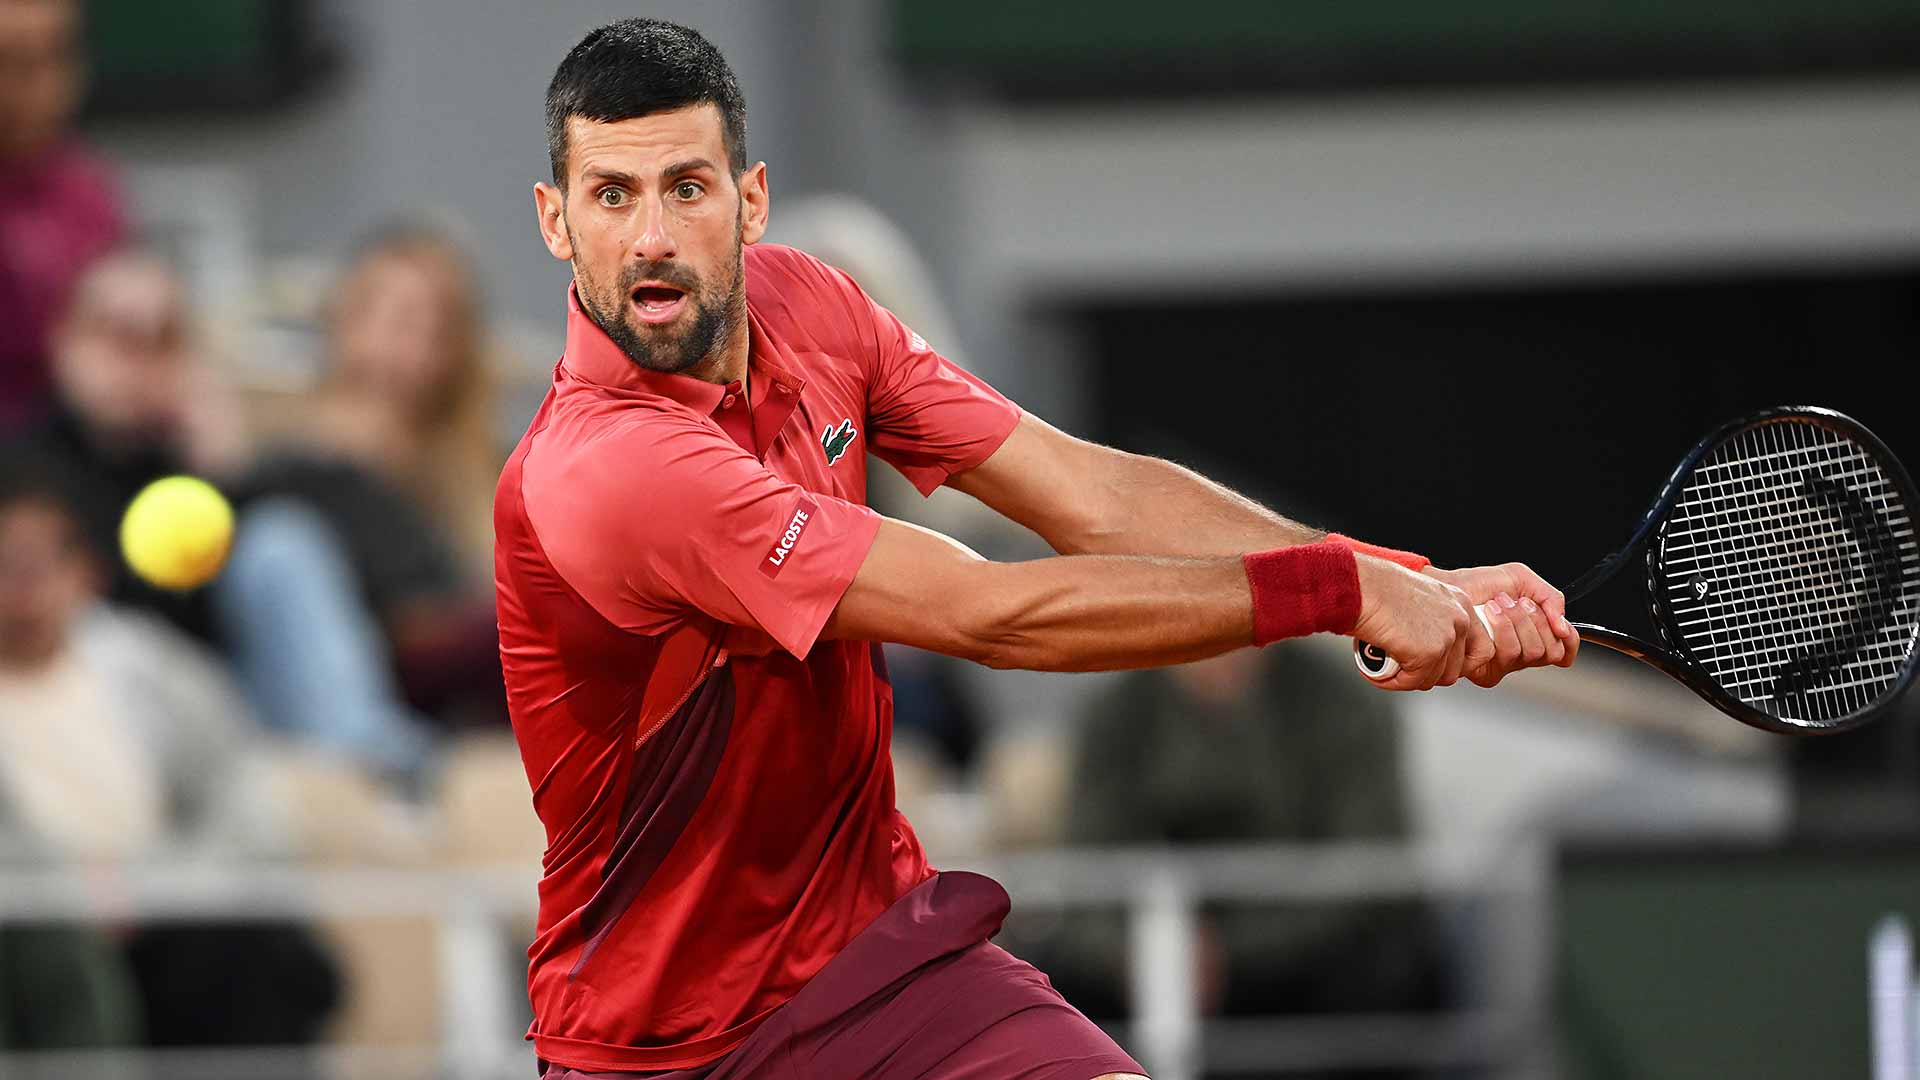 Djokovic overcomes frustrations for straight-sets win in Roland Garros opener